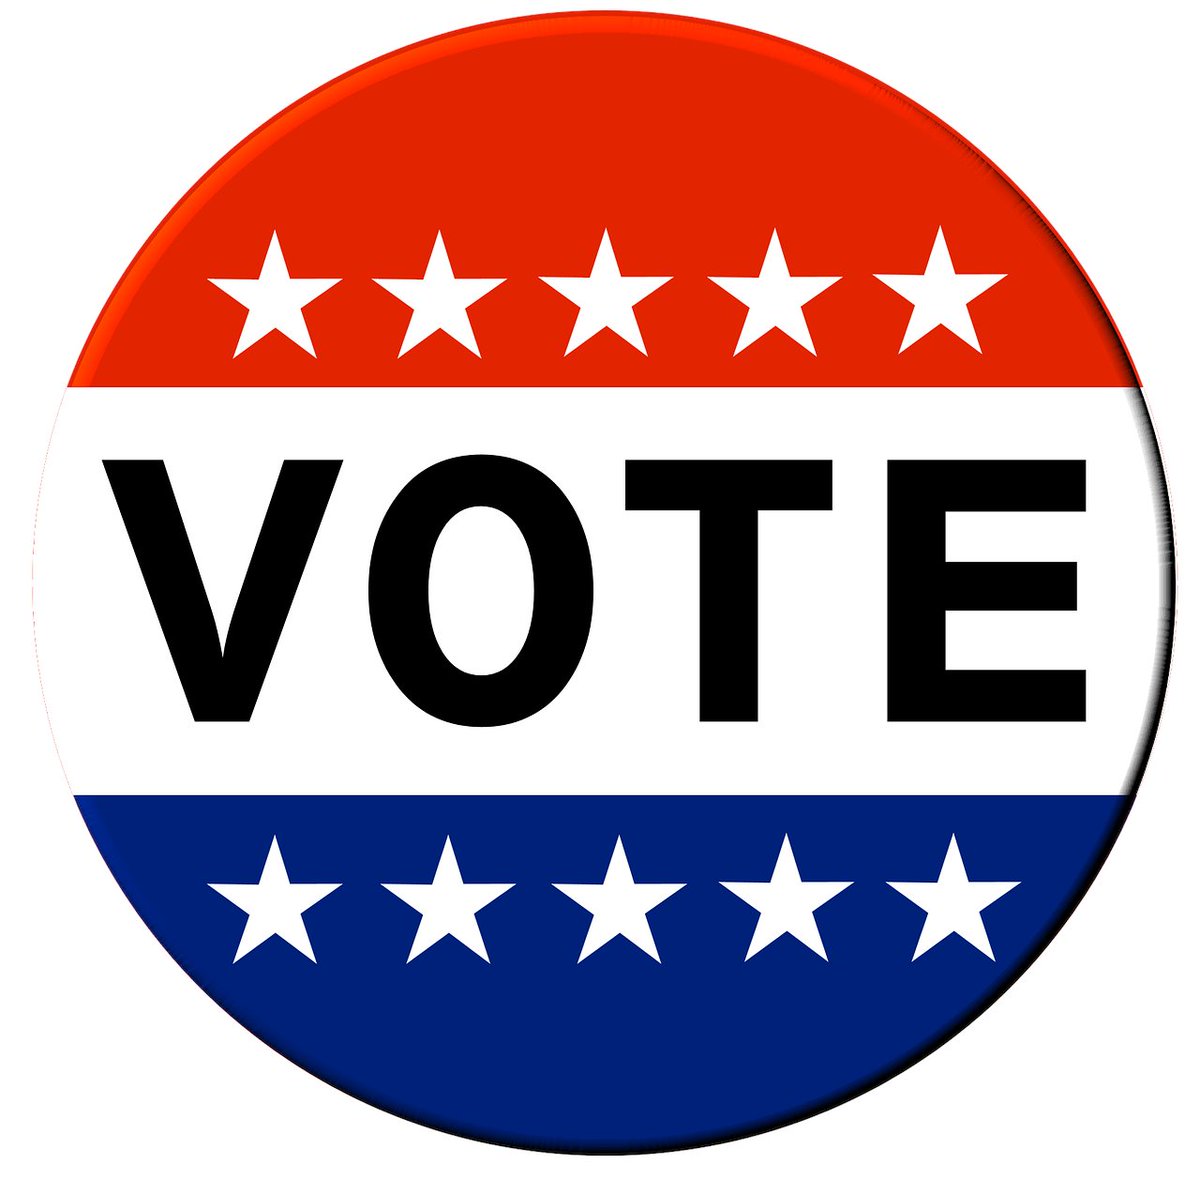 REMINDER: The City Clerk’s Office at City Hall will be closed on March 3rd during the Presidential Preference Primary and Referendum Election at the Caribou Wellness and Recreation Center. Please stop in and see us at the polls! Votes can be cast from 8am-8pm in the Rec. gym.